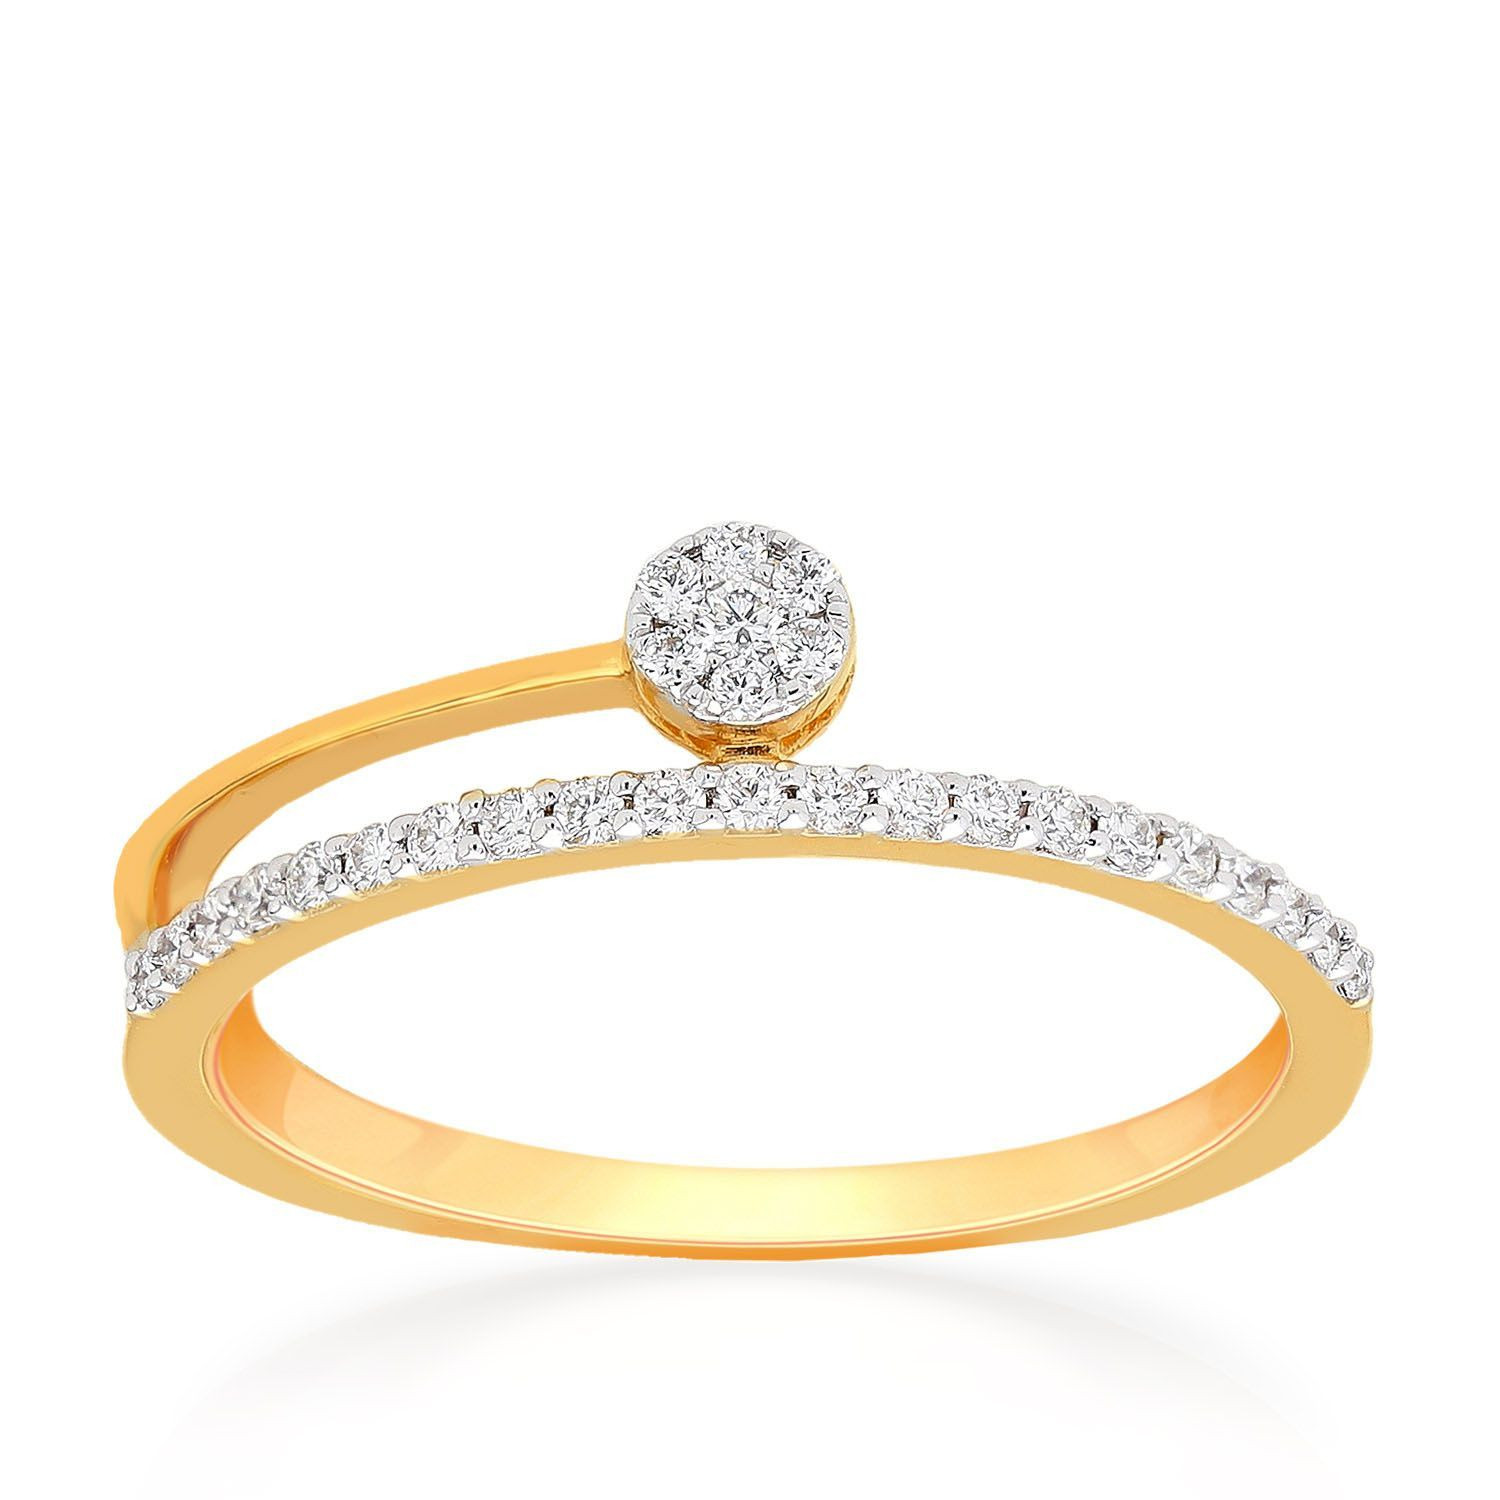 Price Of A Diamond Ring In India | Cost Of A Diamond Ring